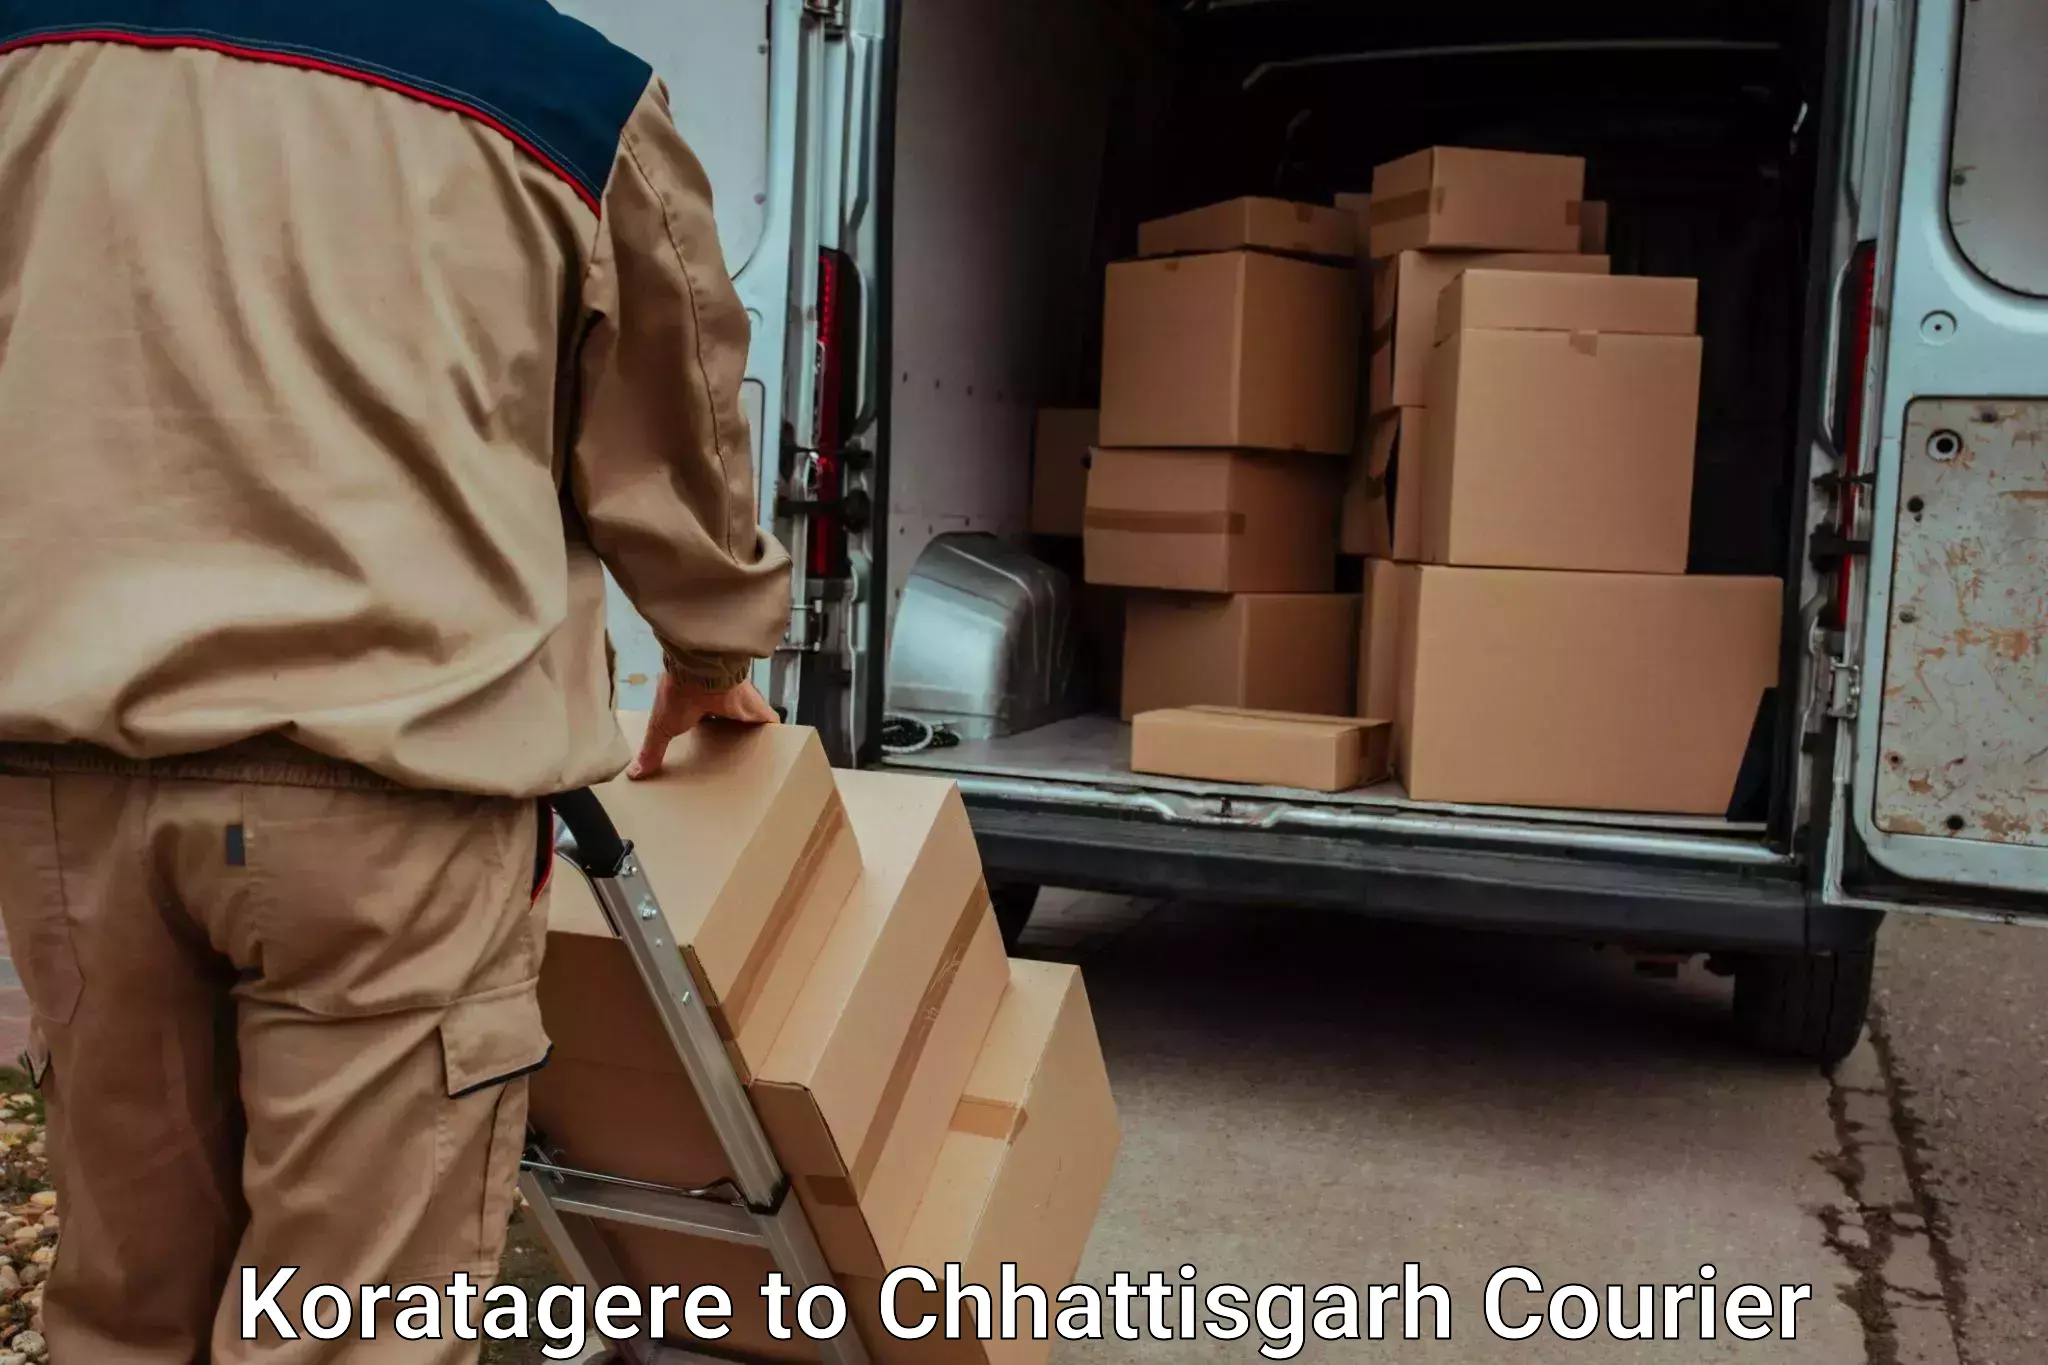 Reliable moving assistance Koratagere to bagbahra